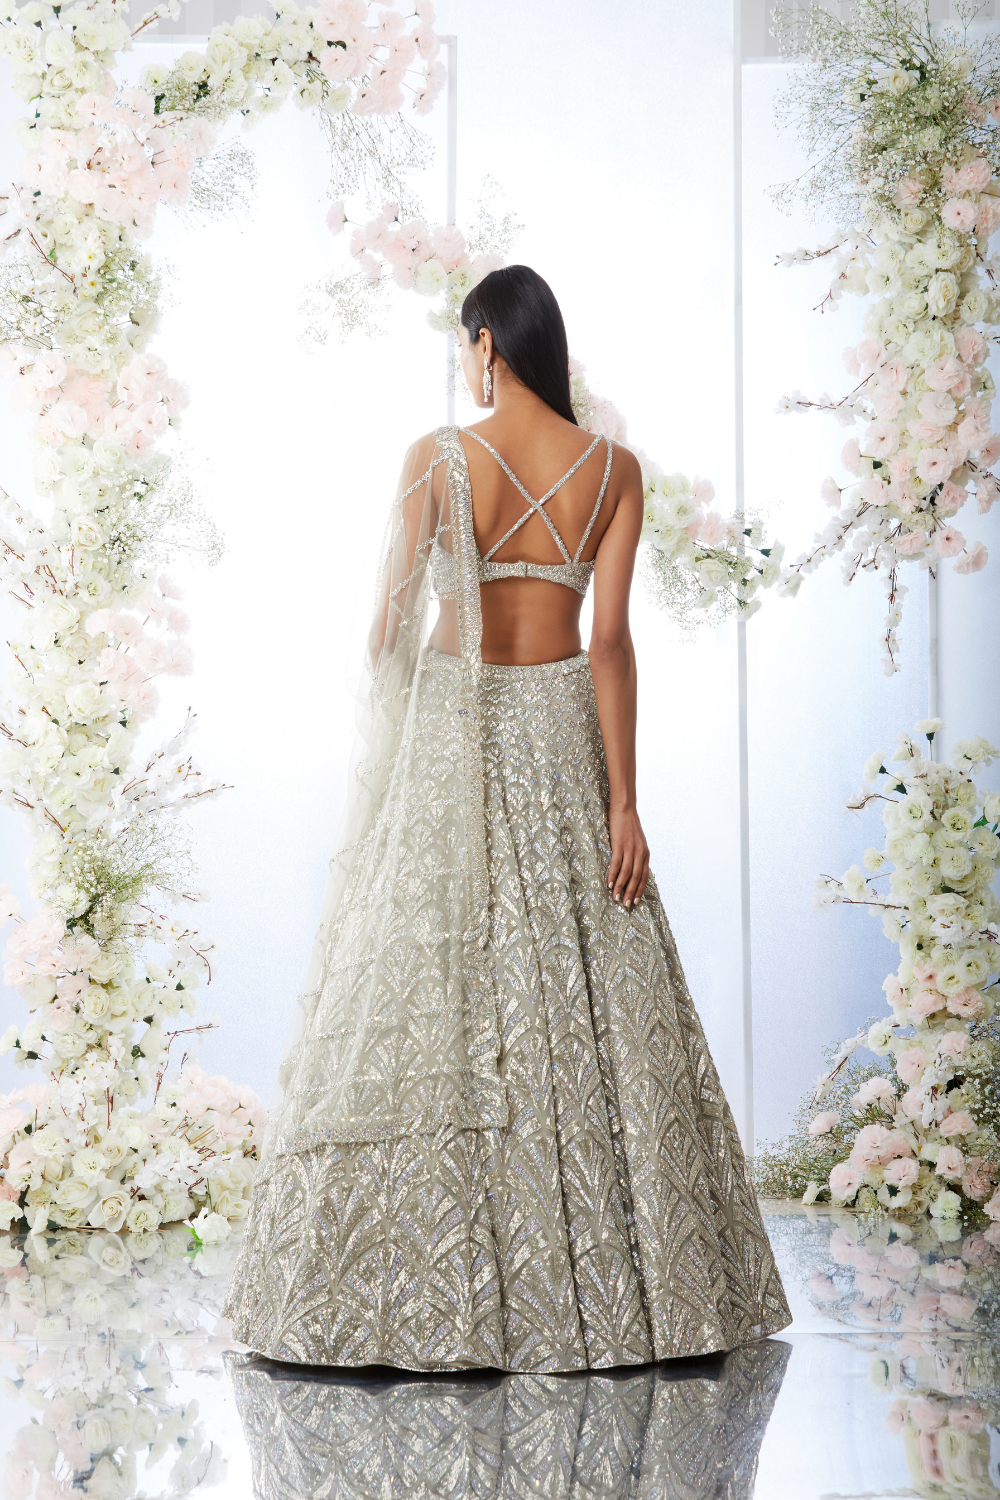 20 Bridal Silver Lehengas That Will Make You Fall In Love With The Color! | Bridal  lehenga collection, Bridal, Wedding outfit